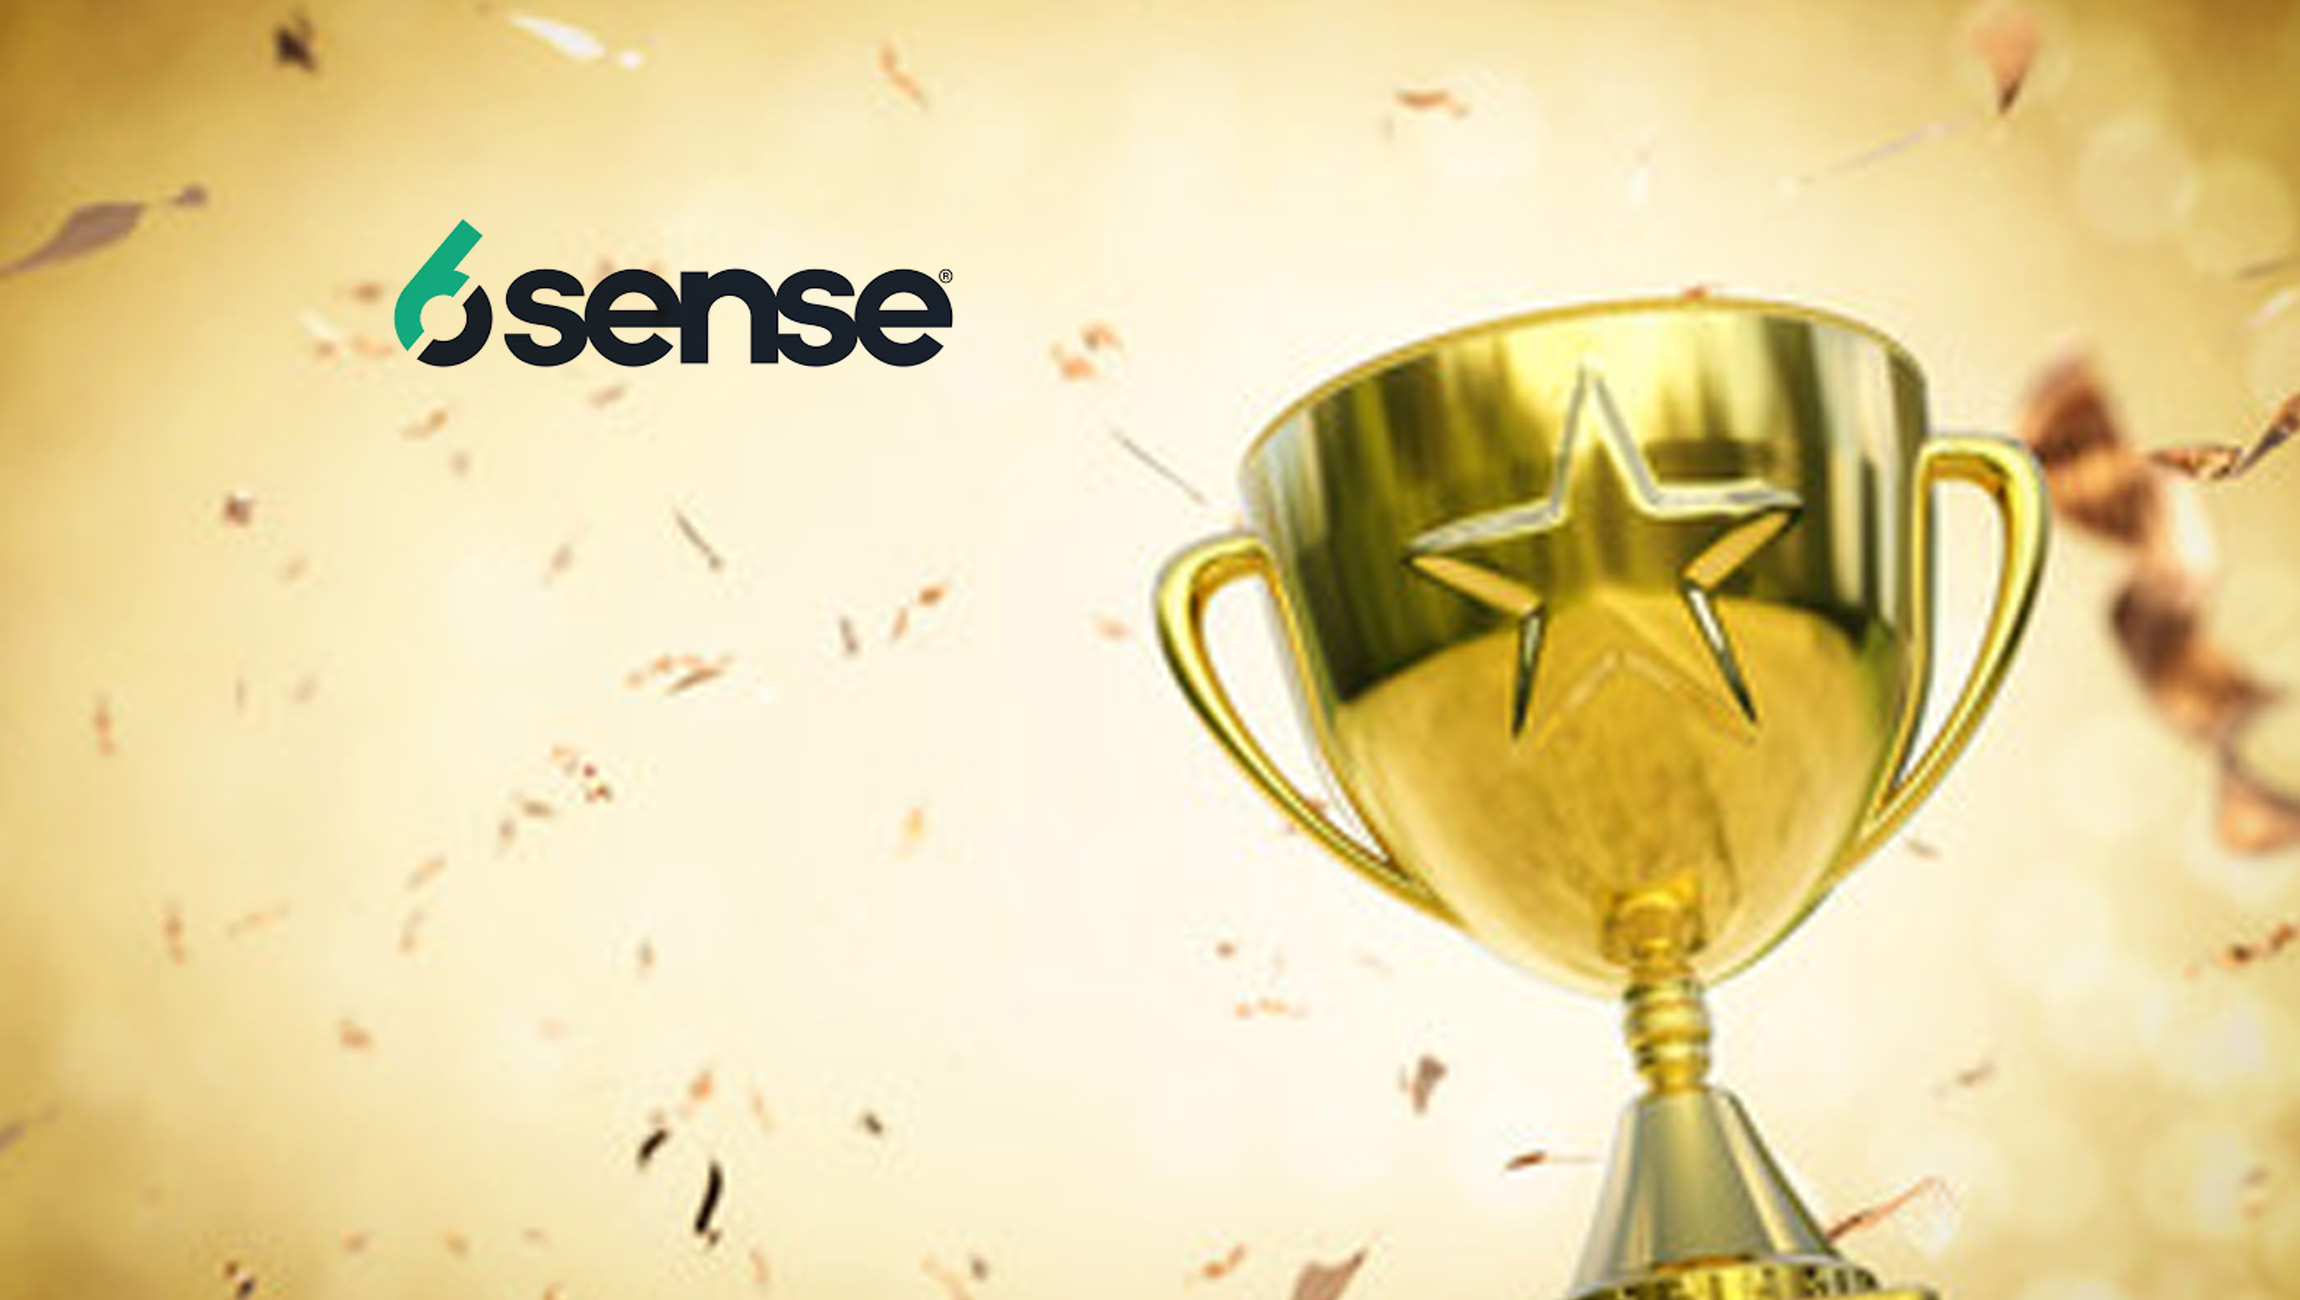 6sense Receives Recognition for Three TrustRadius 2023 Winter Best of Awards in Account-Based Marketing